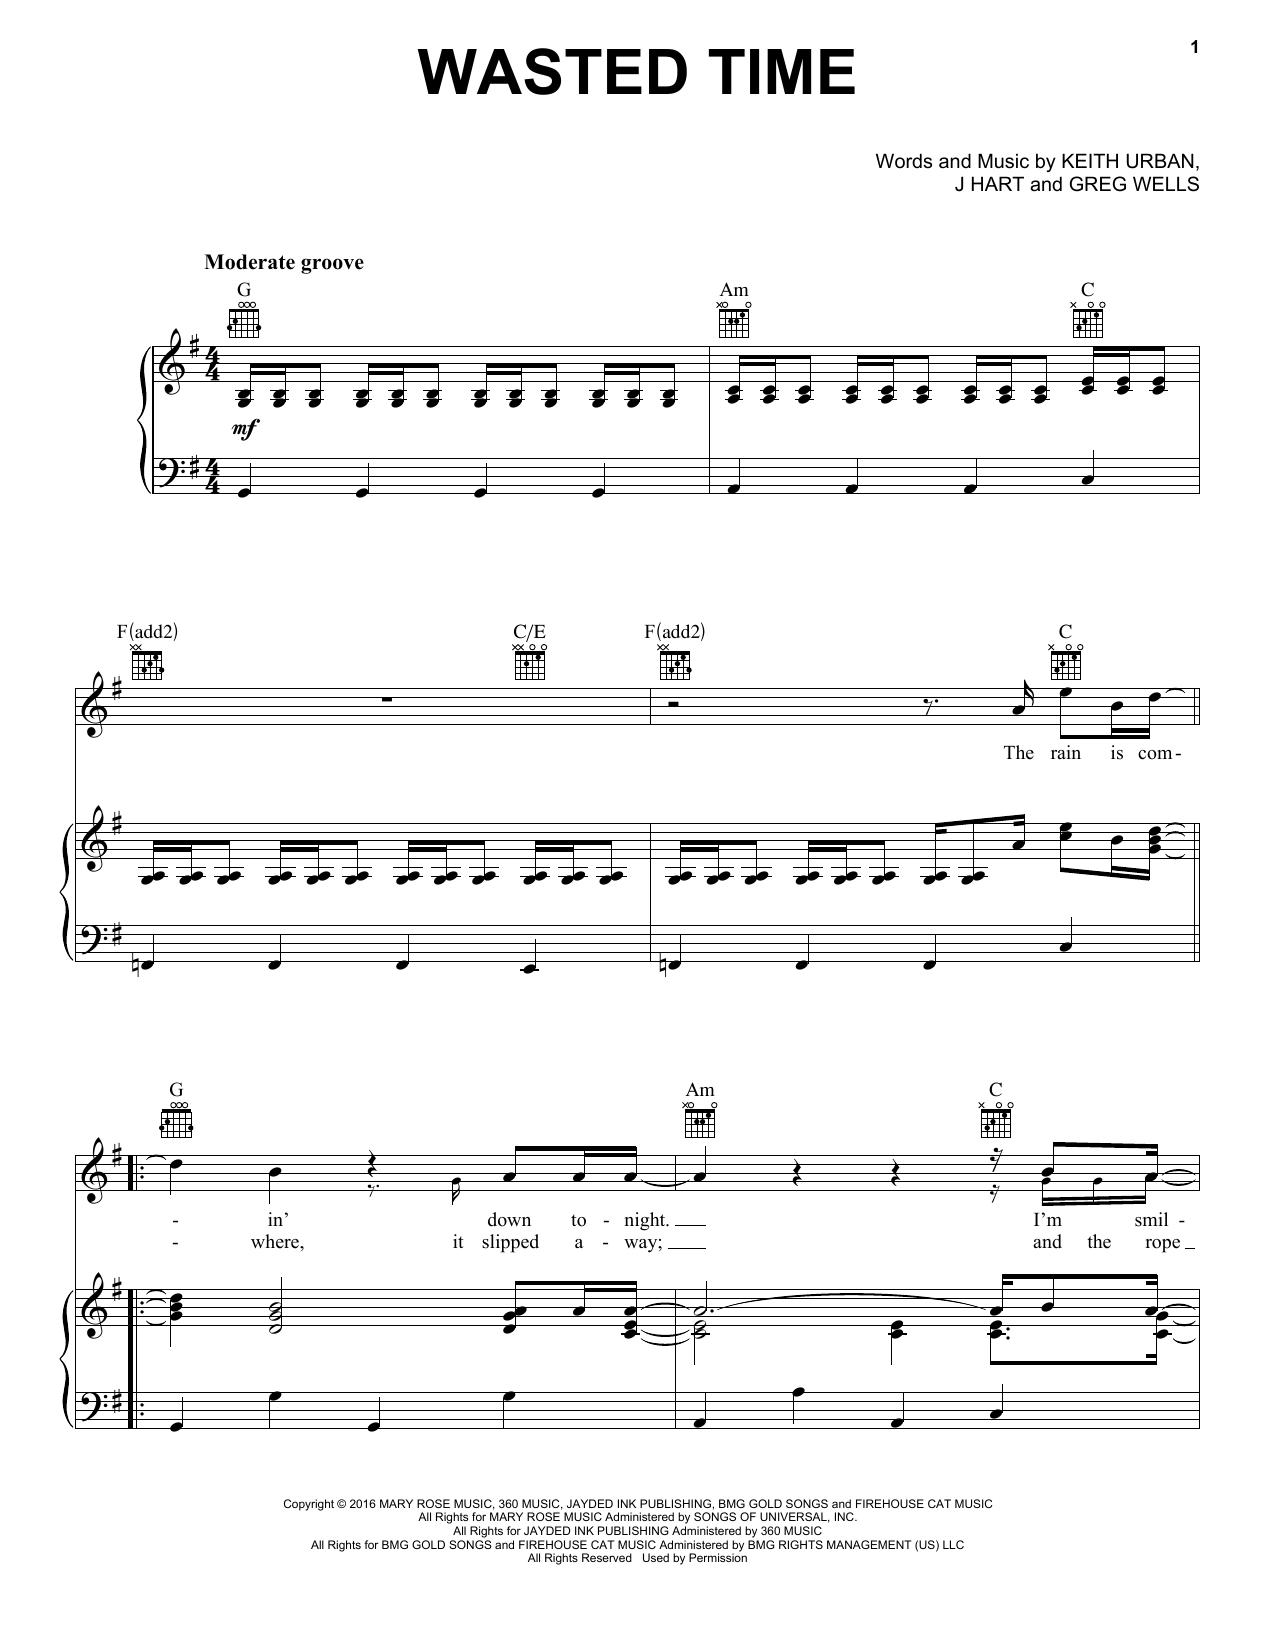 Download Keith Urban Wasted Time Sheet Music